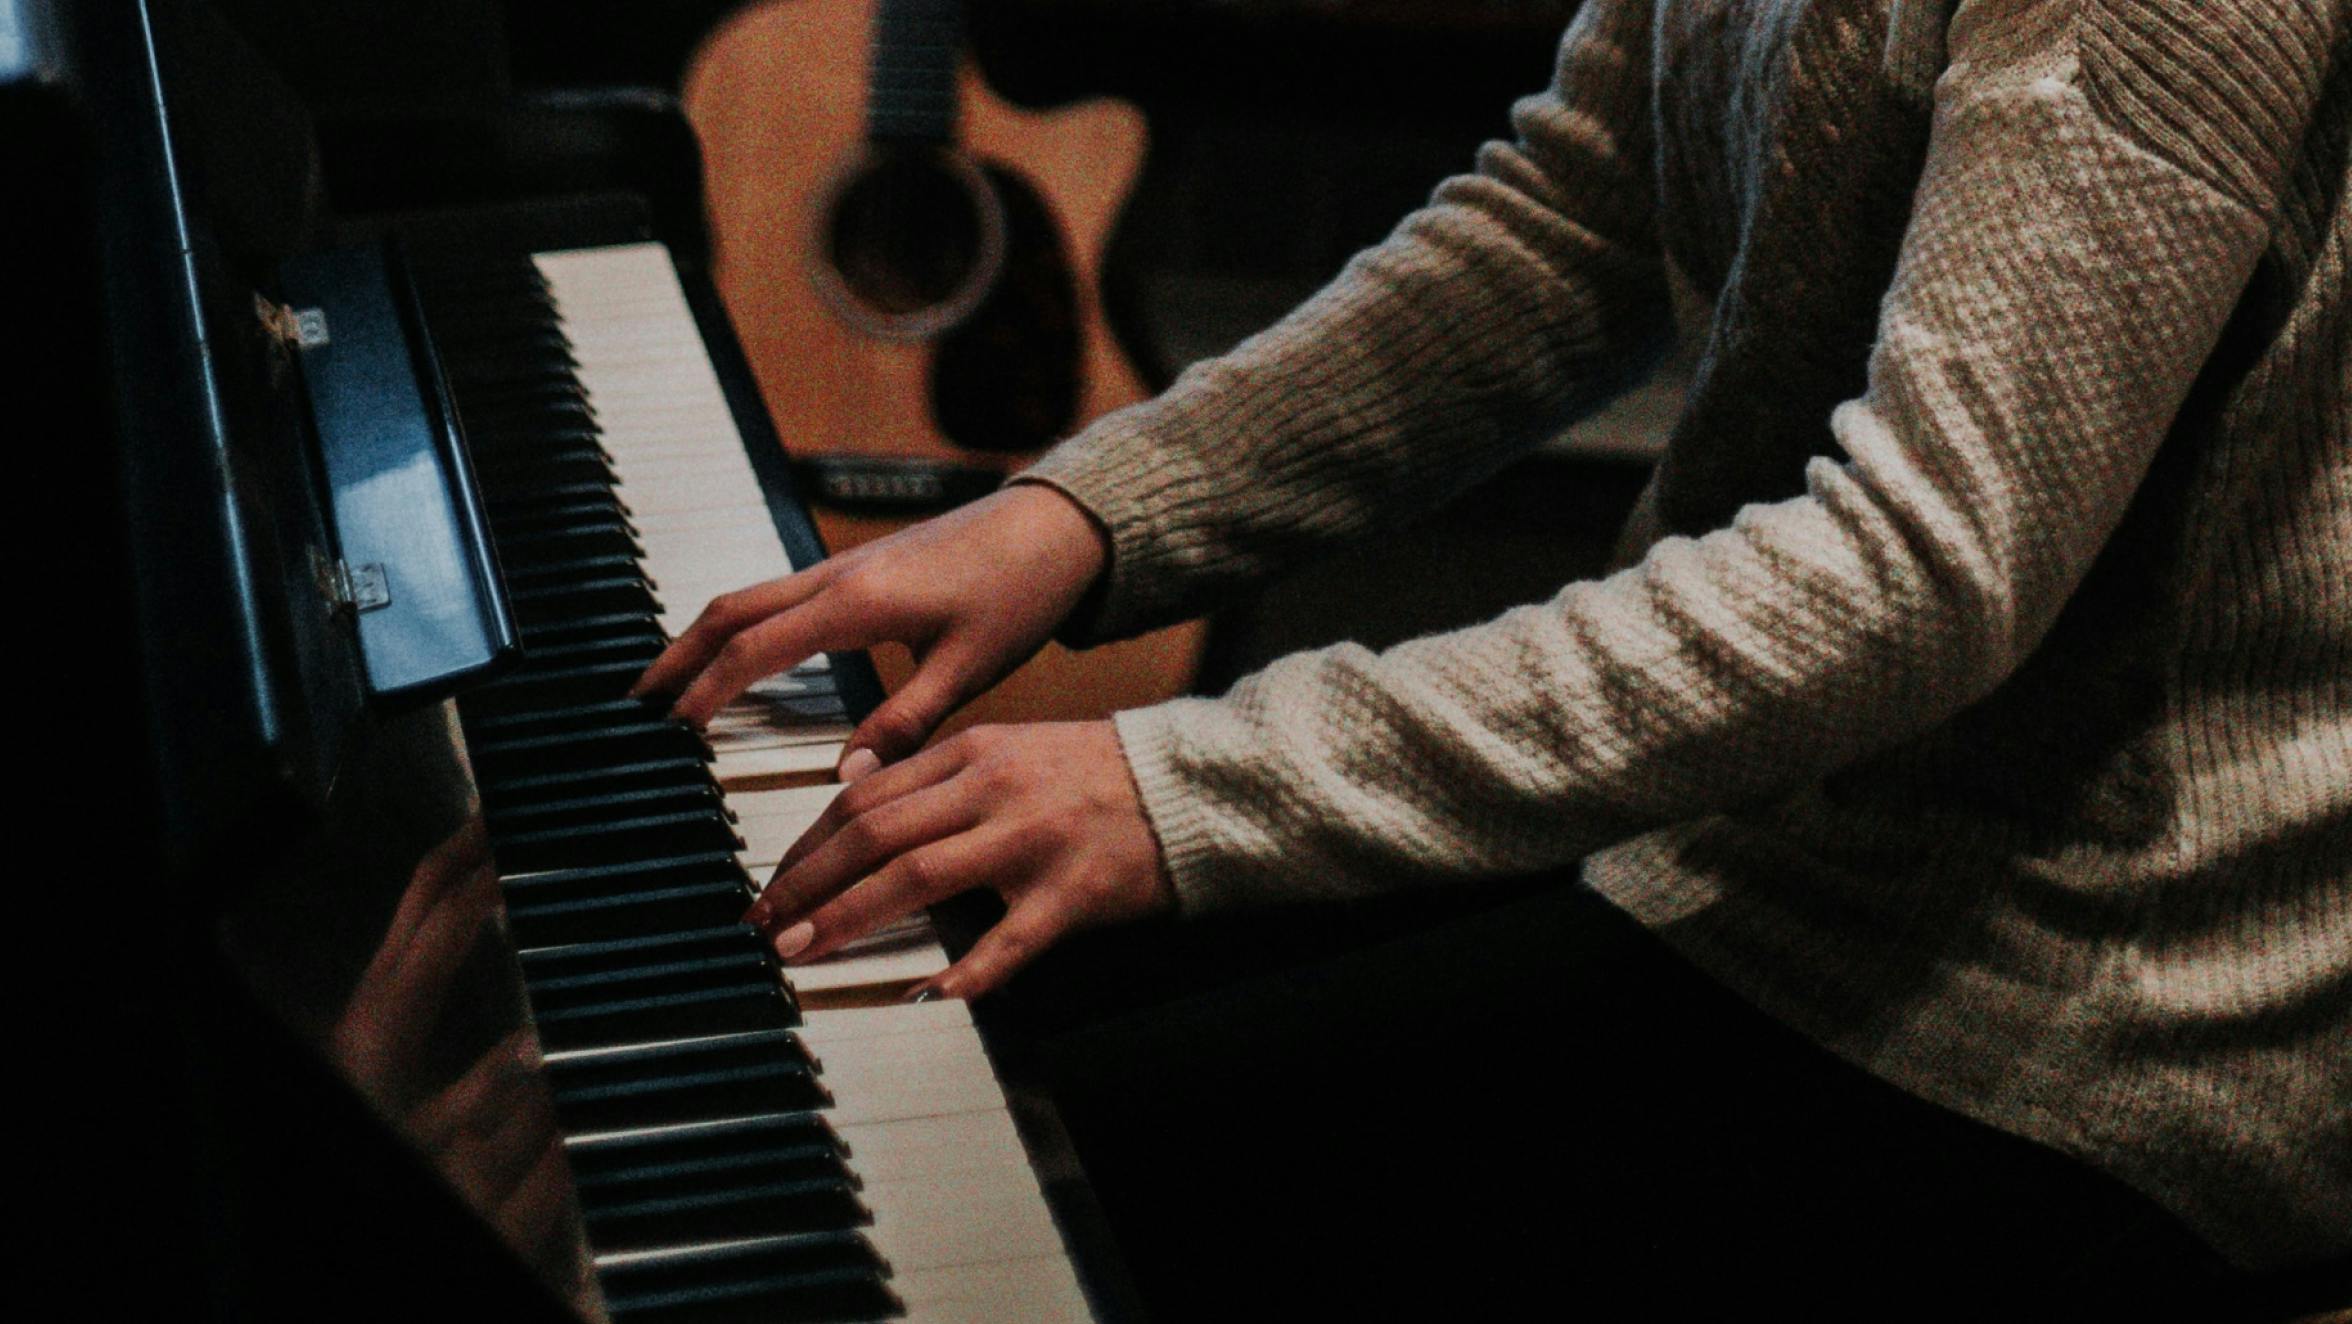 Ten essential tips when starting to learn to play the piano